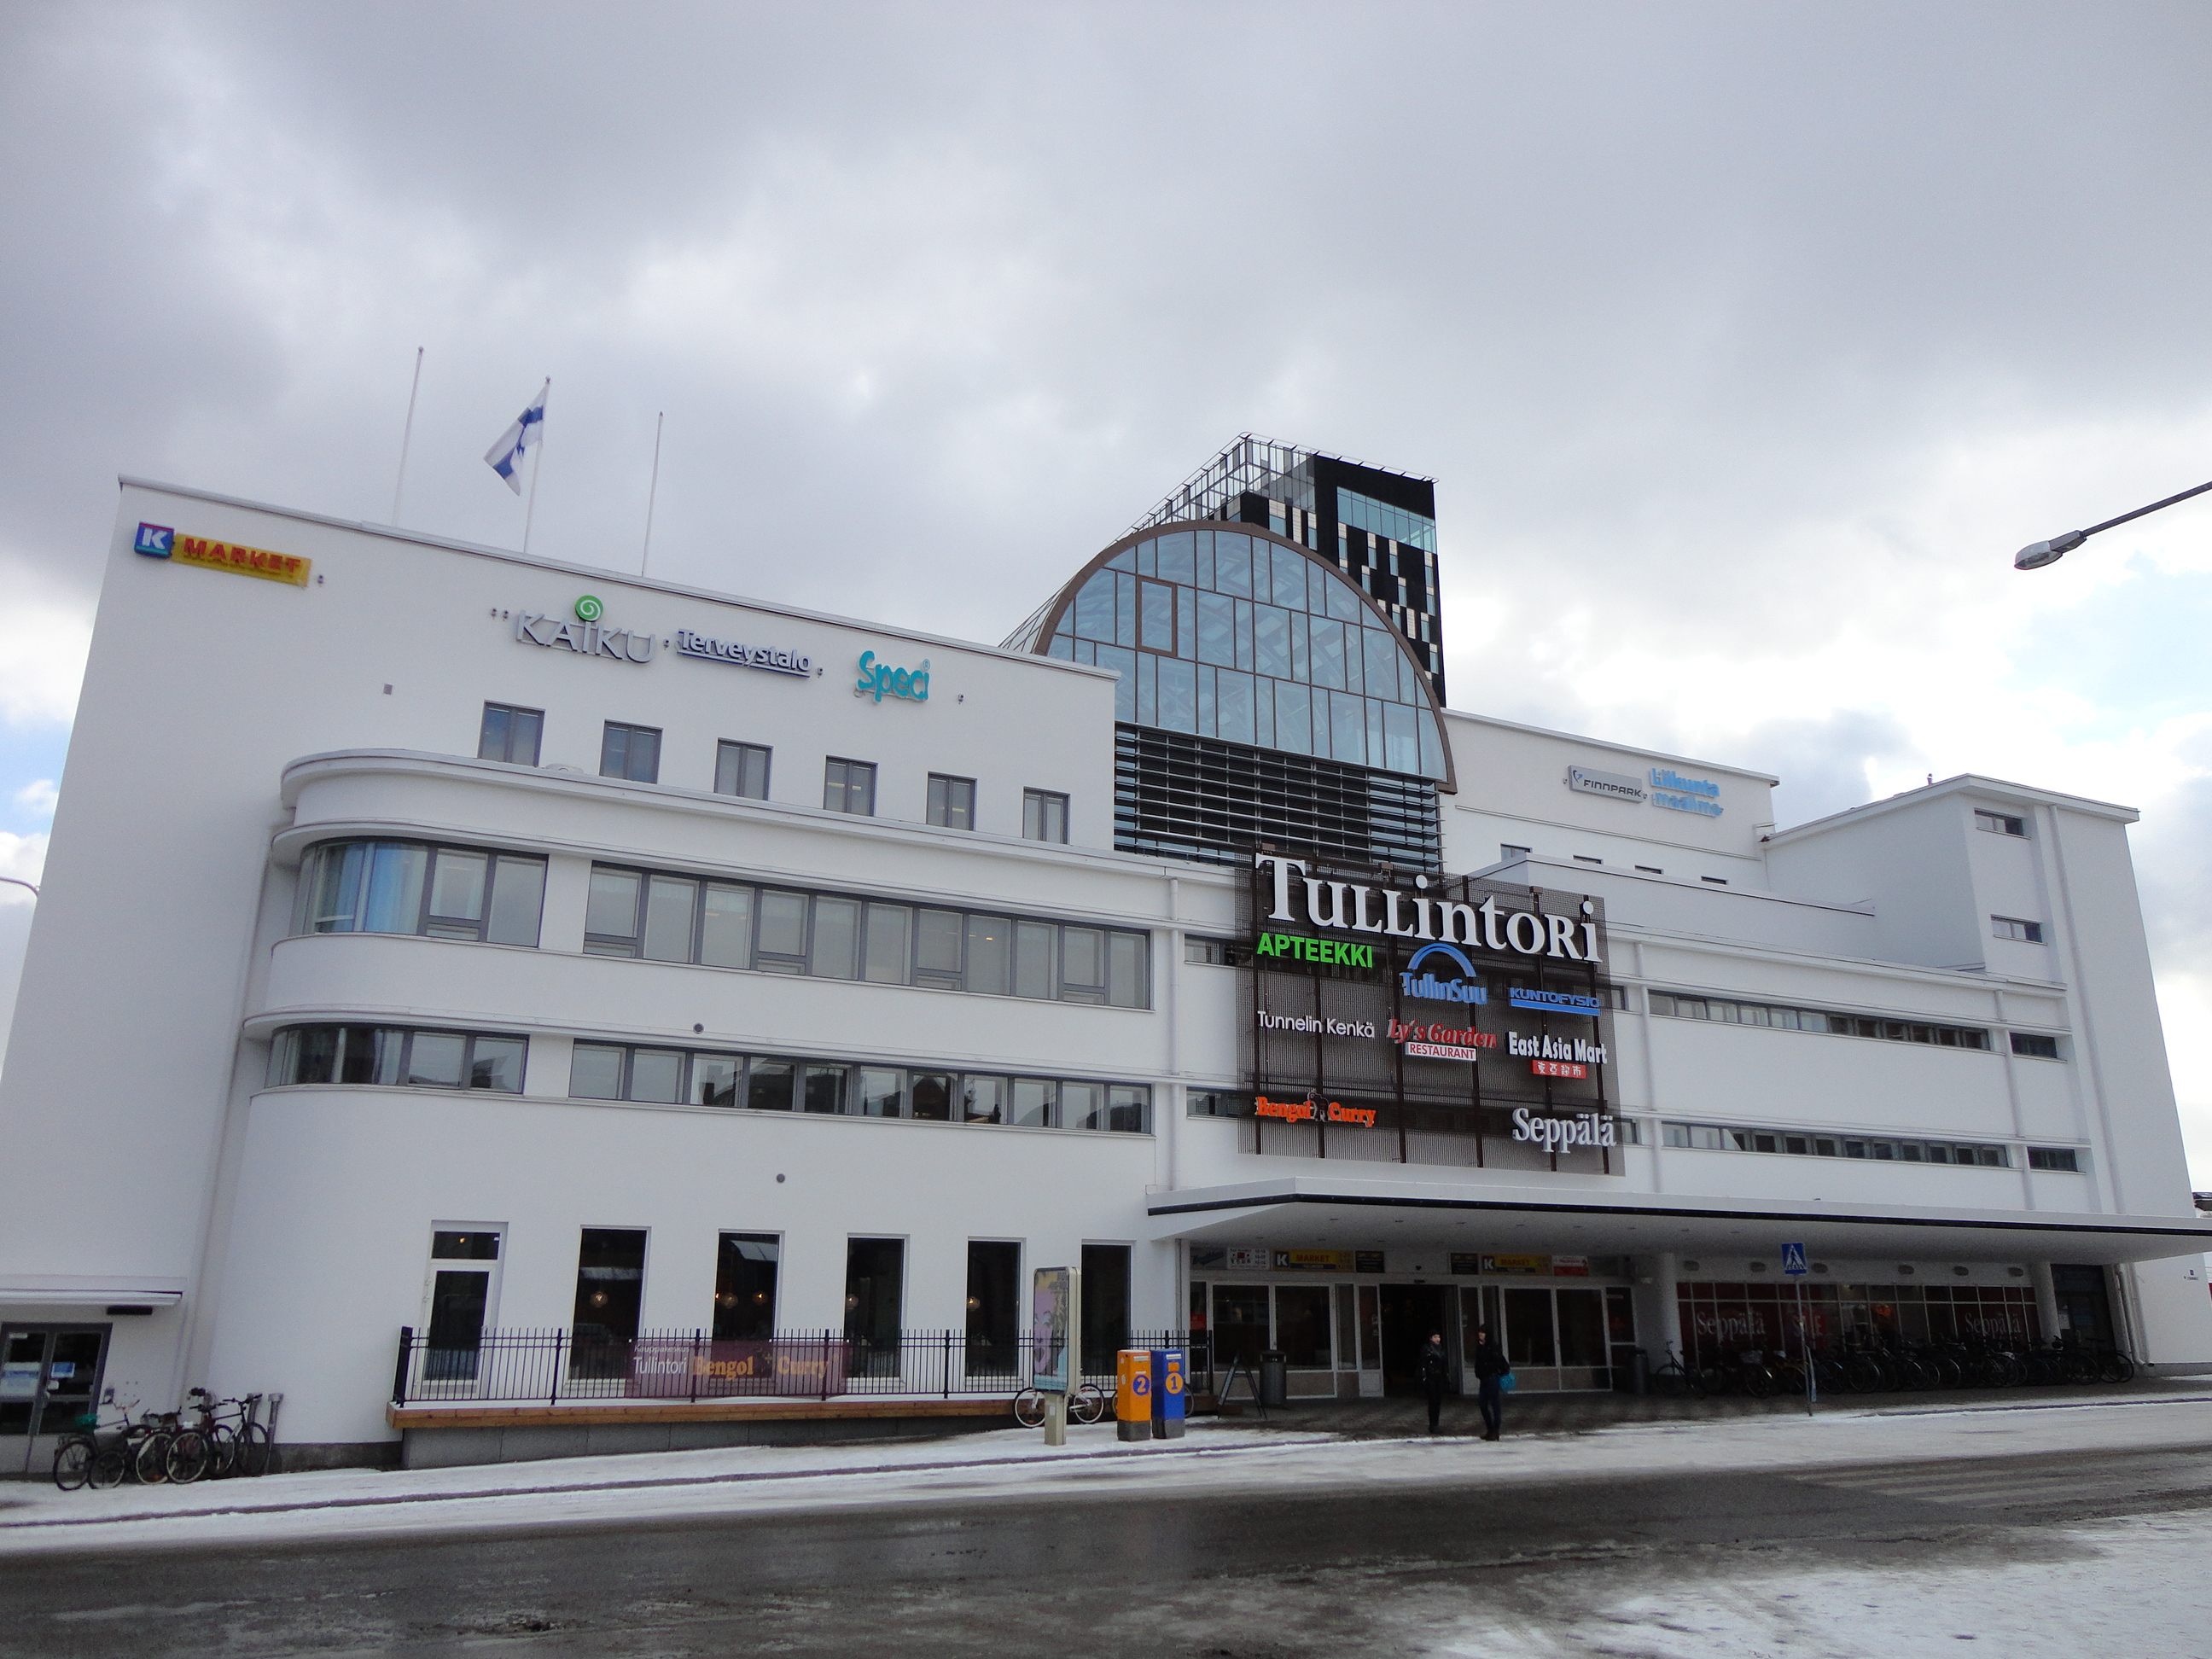 You are currently viewing Tullintorin kauppakeskus, Tampere